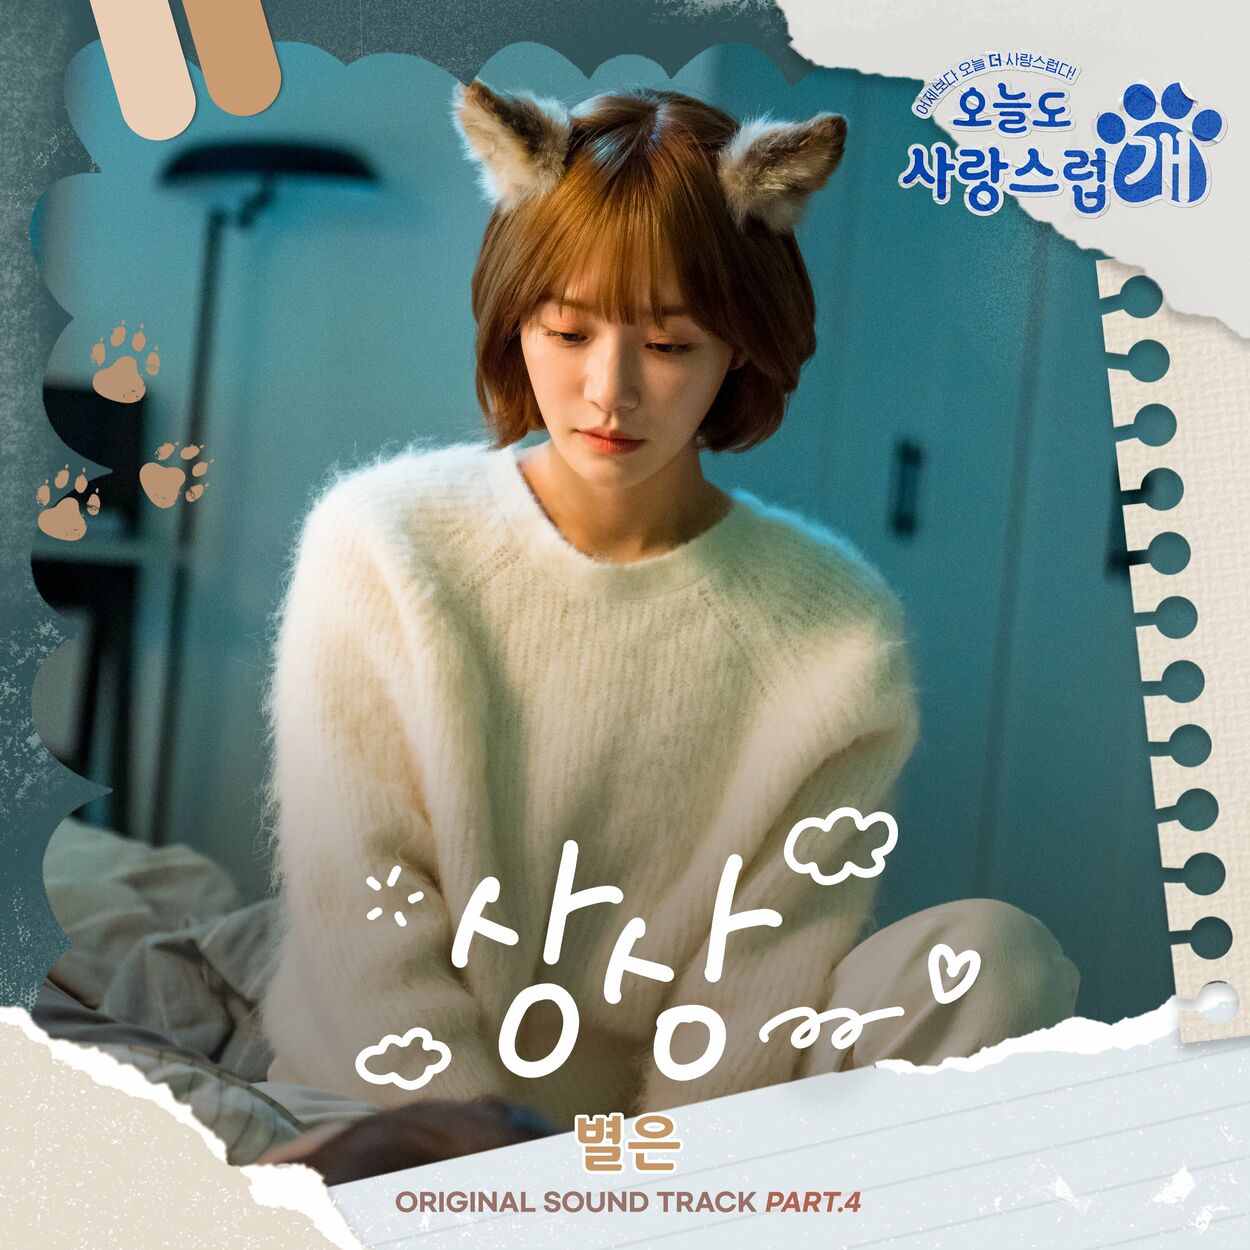 Byeol Eun – Imagine (from “A Good Day to be a Dog” Original Television Sountrack, Pt. 4)